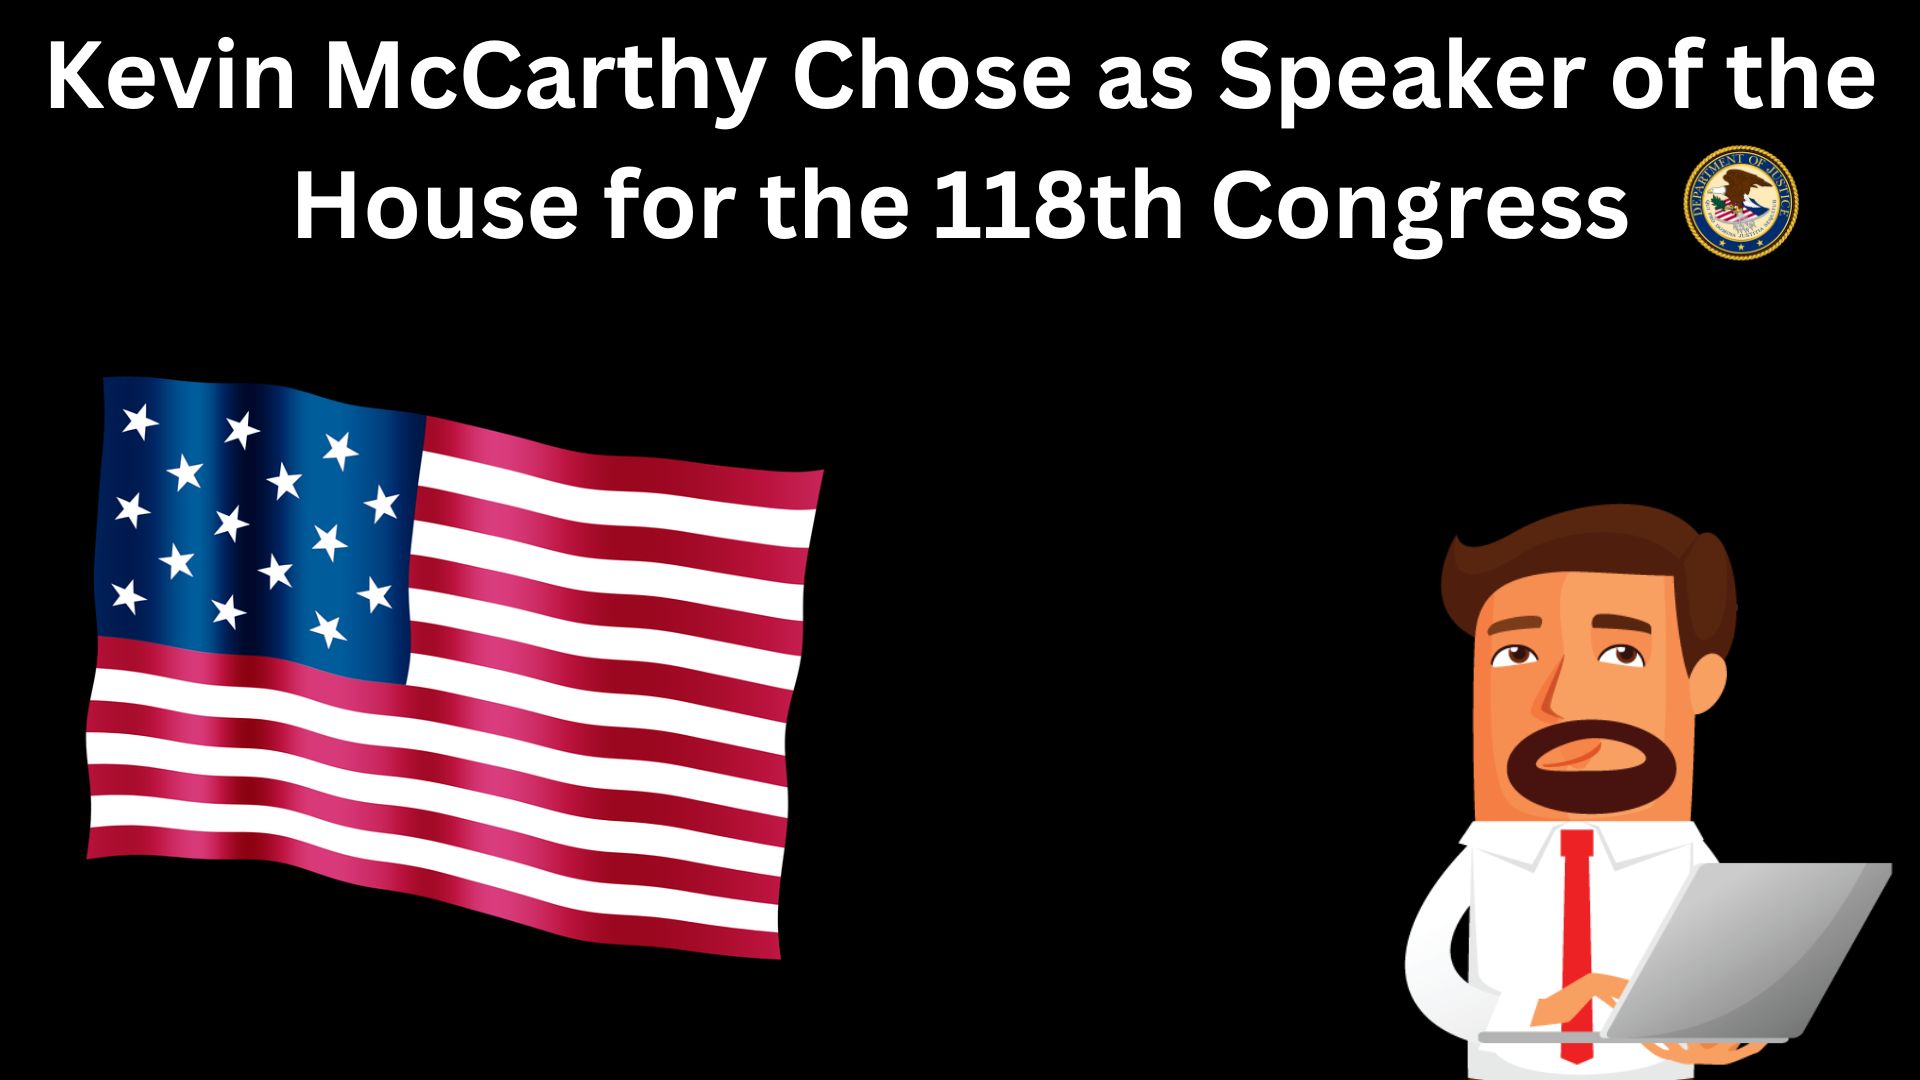 Kevin mccarthy chose as speaker of the house for the 118th congress